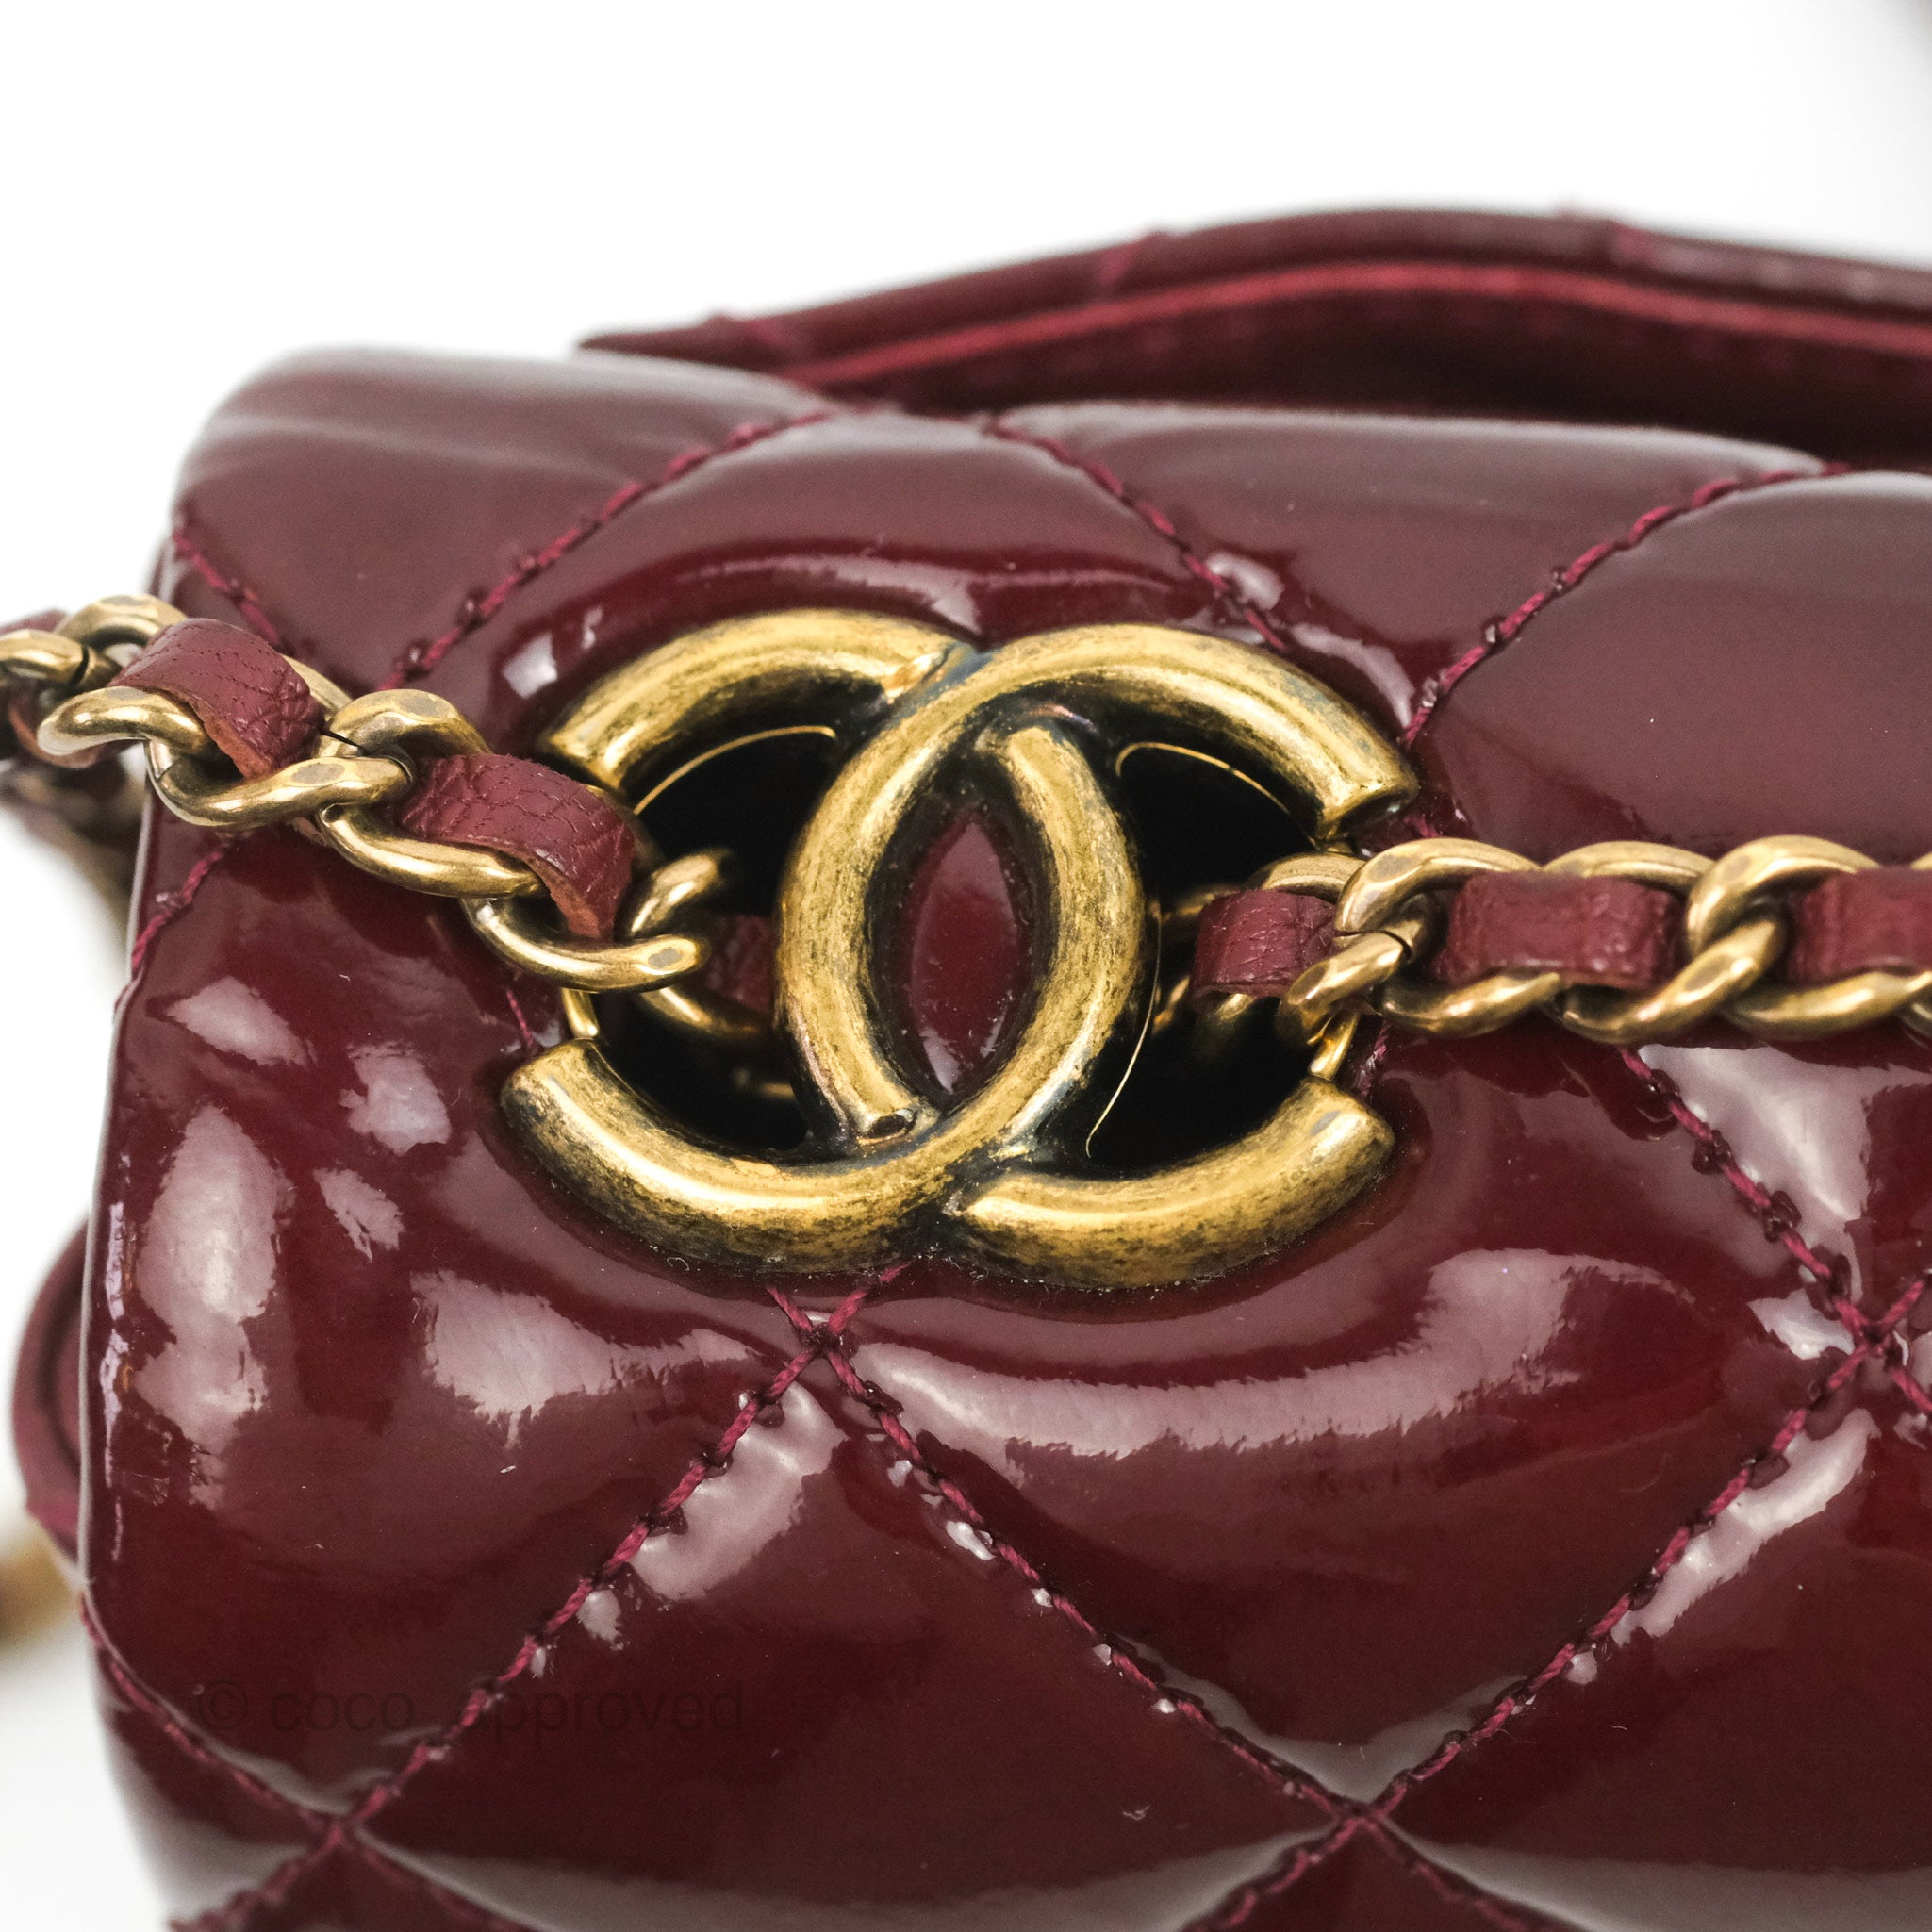 Chanel Quilted CC Eyelet Flap Burgundy Patent Goatskin Antique Gold Ha – Coco  Approved Studio